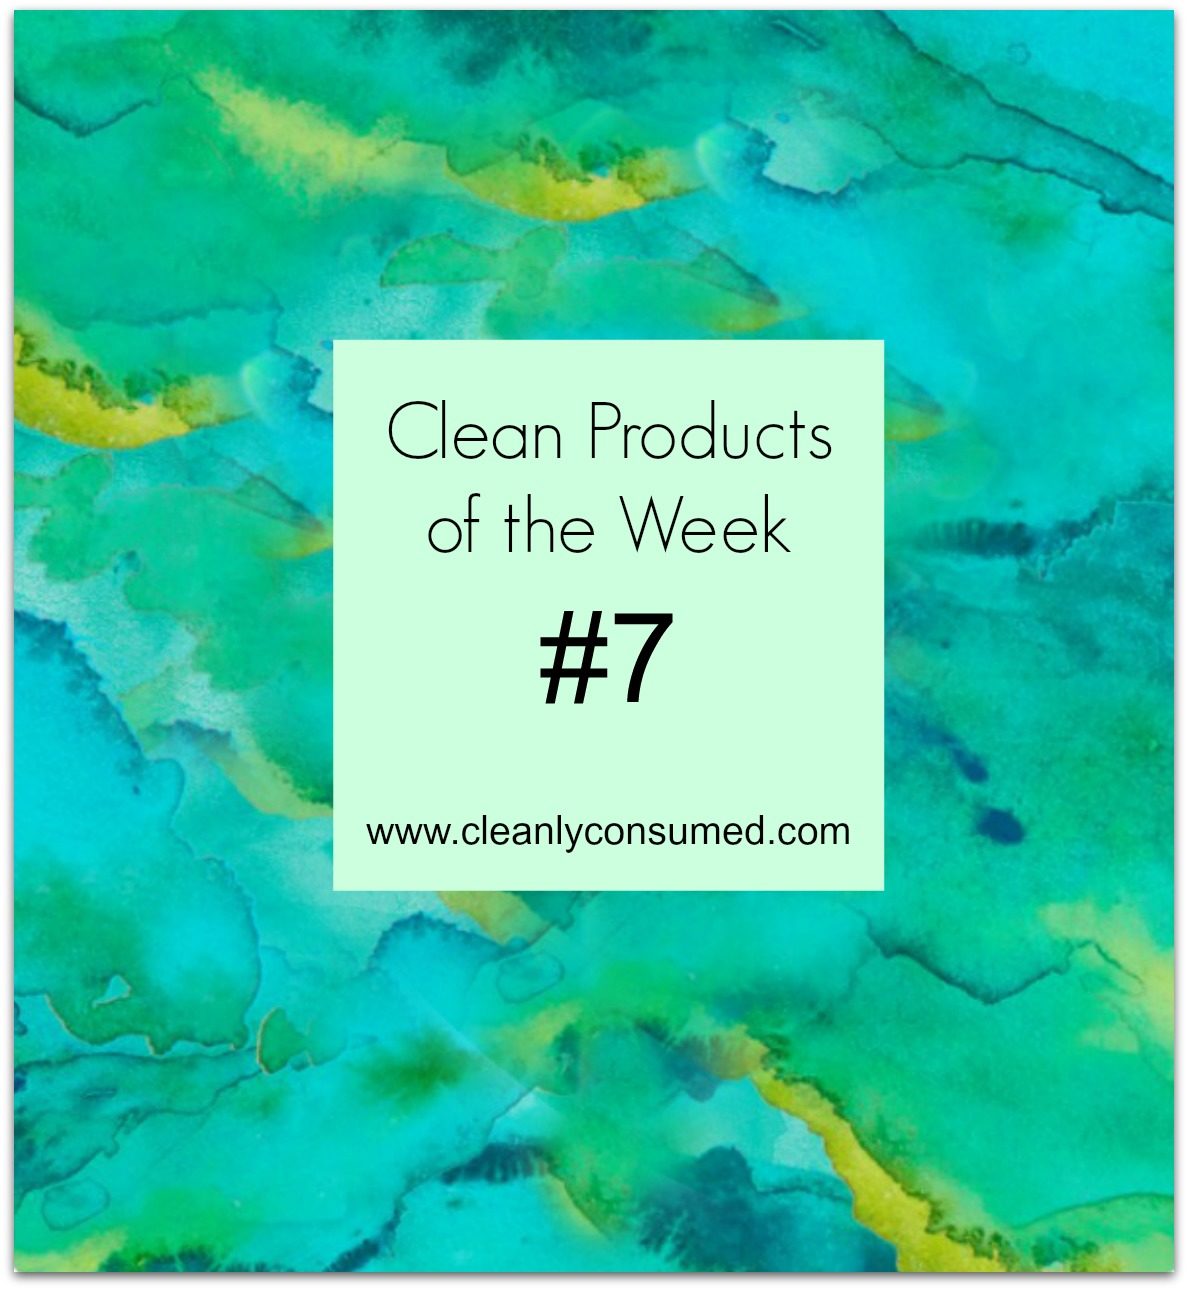 Clean Products of the Week #7